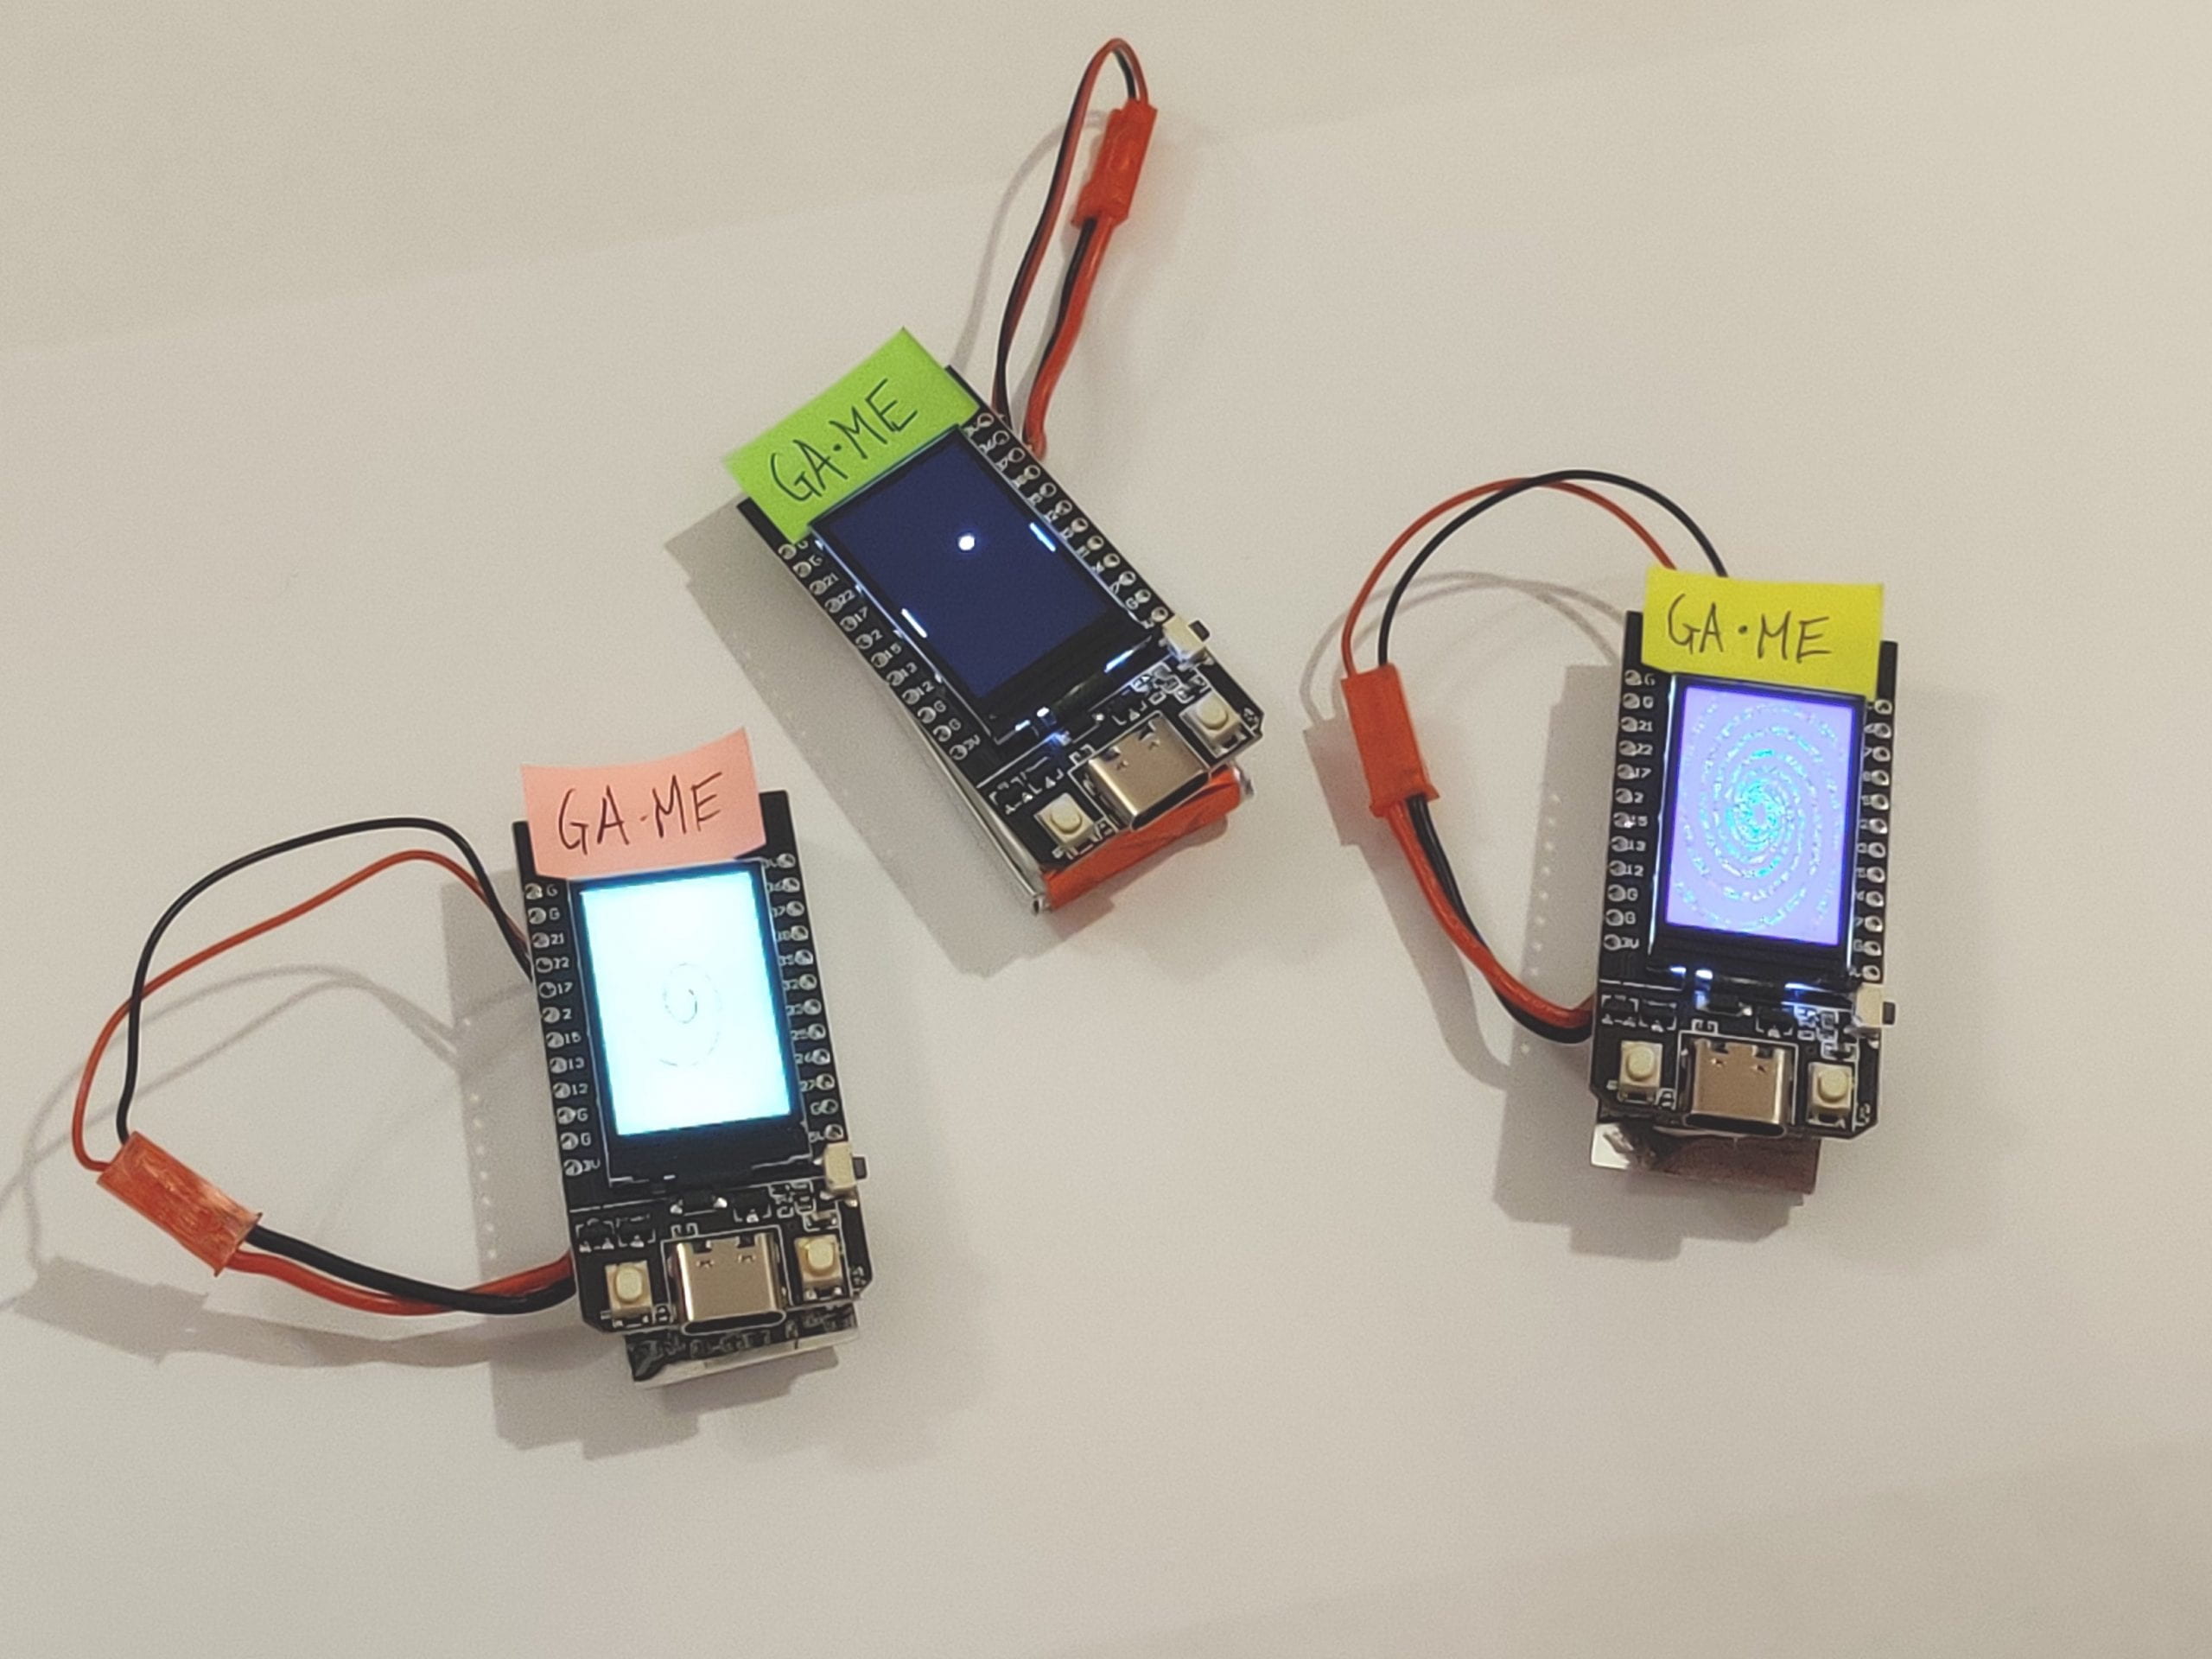 Photo of the three Ga-Me devices showing the Pong and generative art components